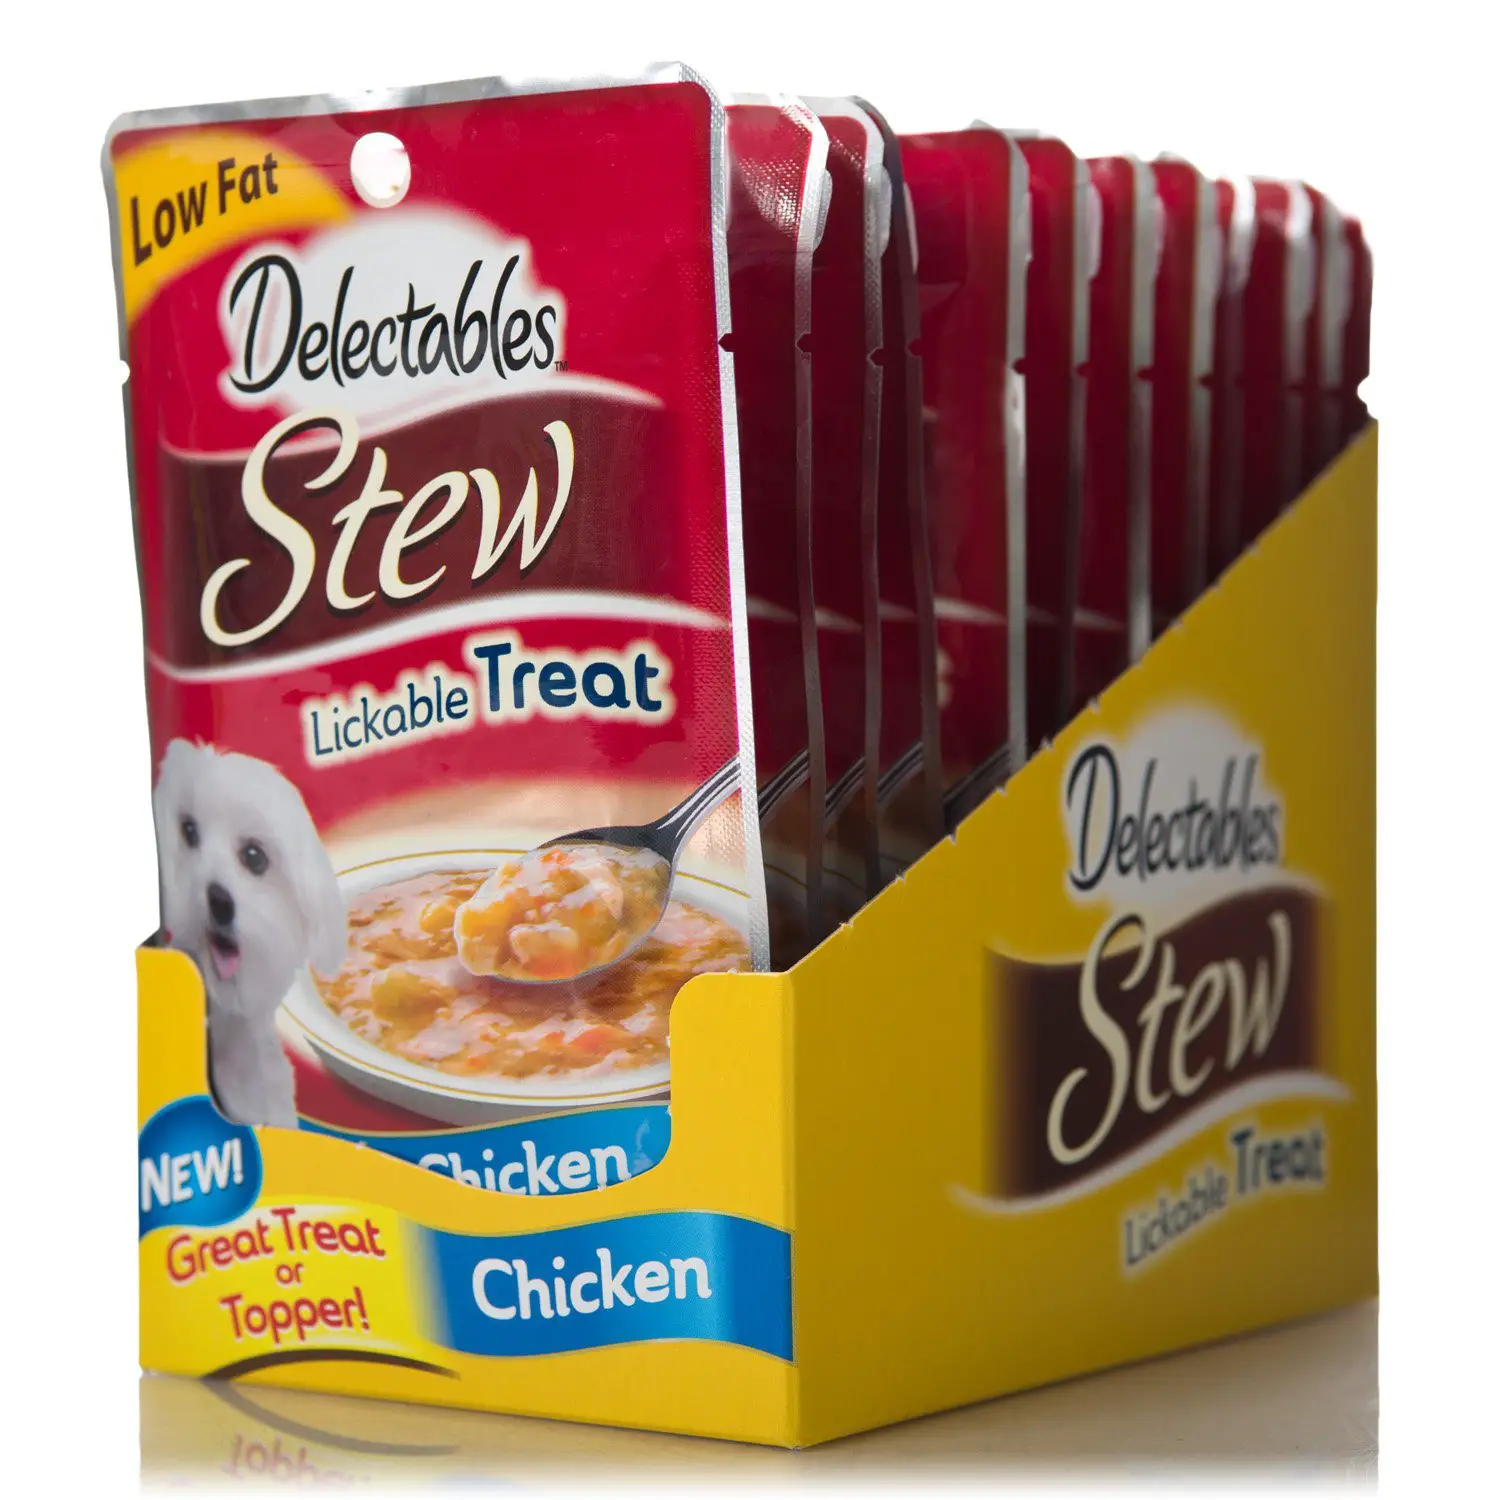 Delectables Stew Lickable Dog Treats Giveaway